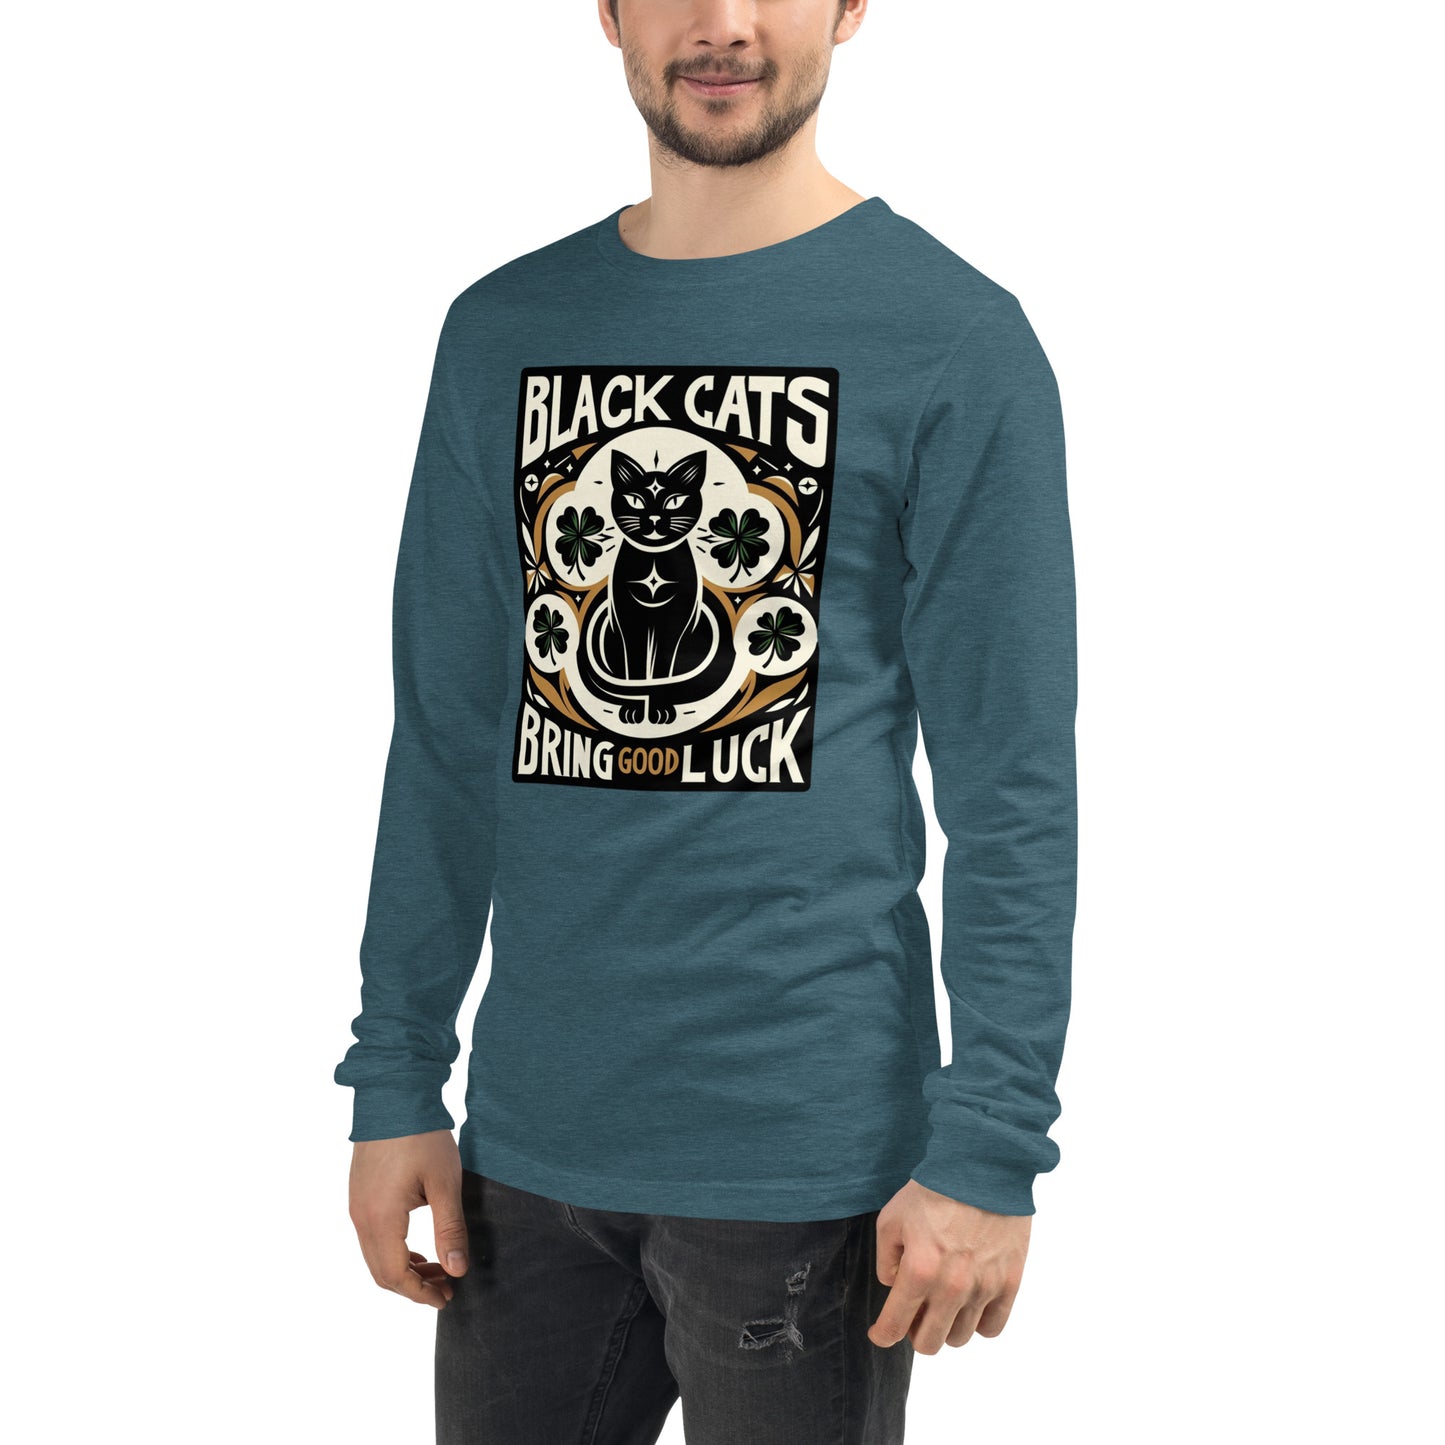 Black Cats Bring Good Luck Graphic Unisex Long Sleeve Tee